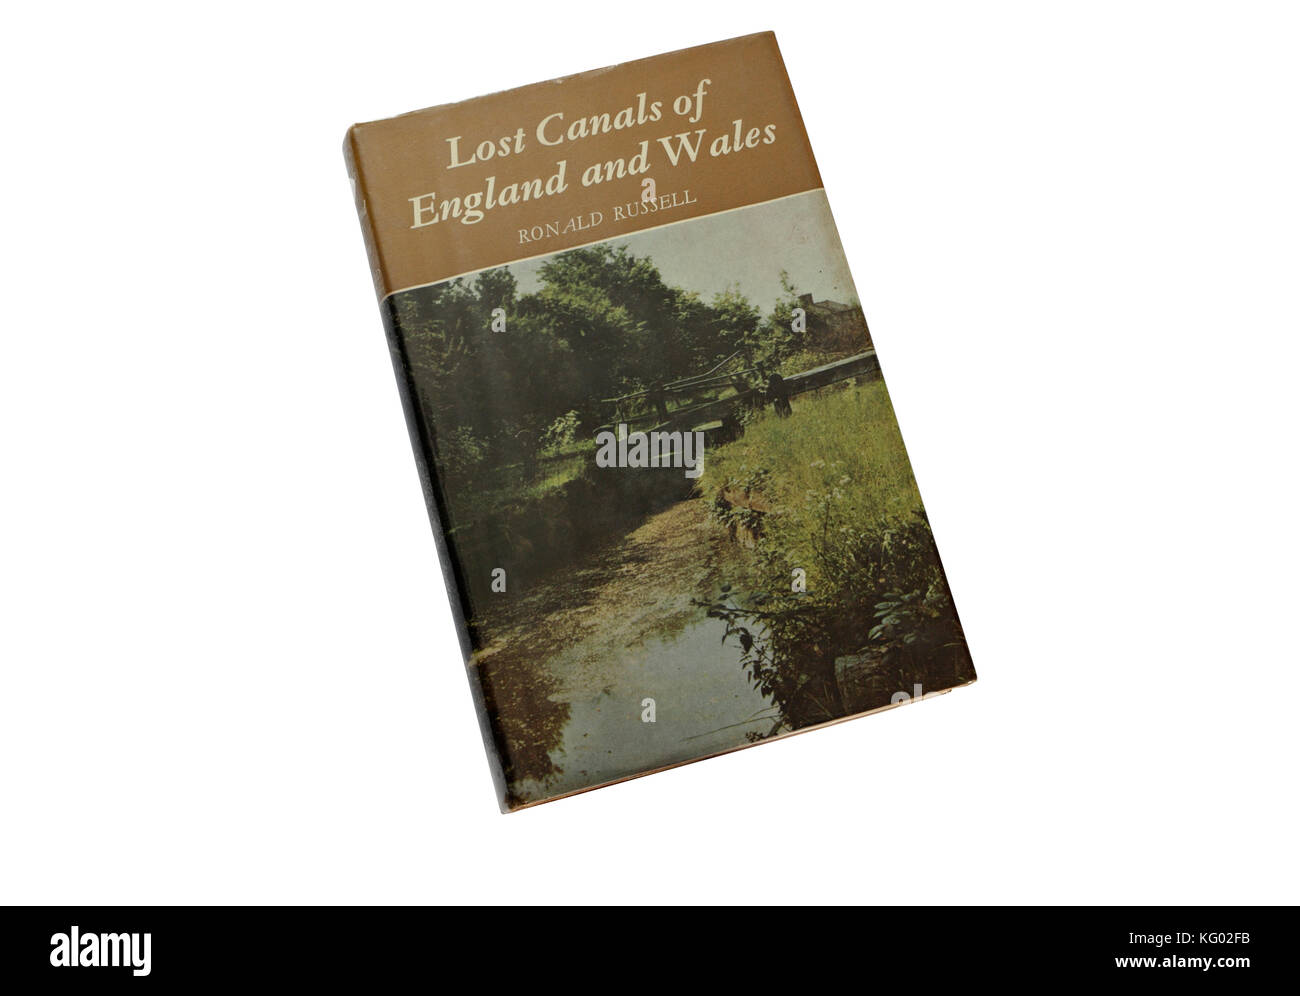 Lost canals of England and wales book cover Stock Photo